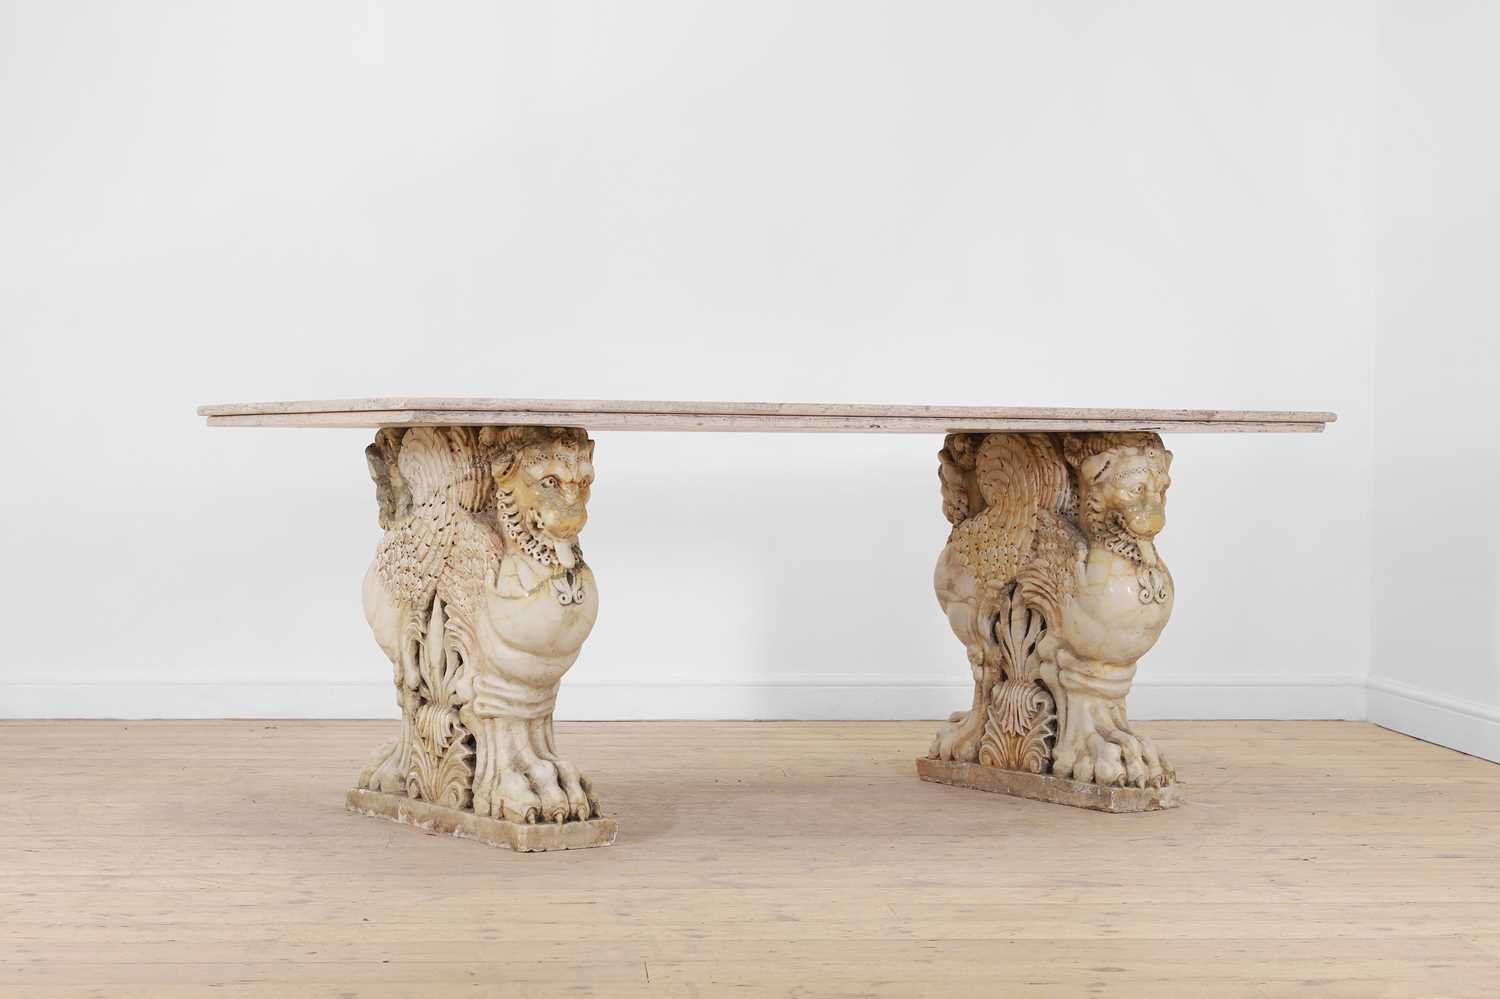 Lot A marble and travertine console table after the antique